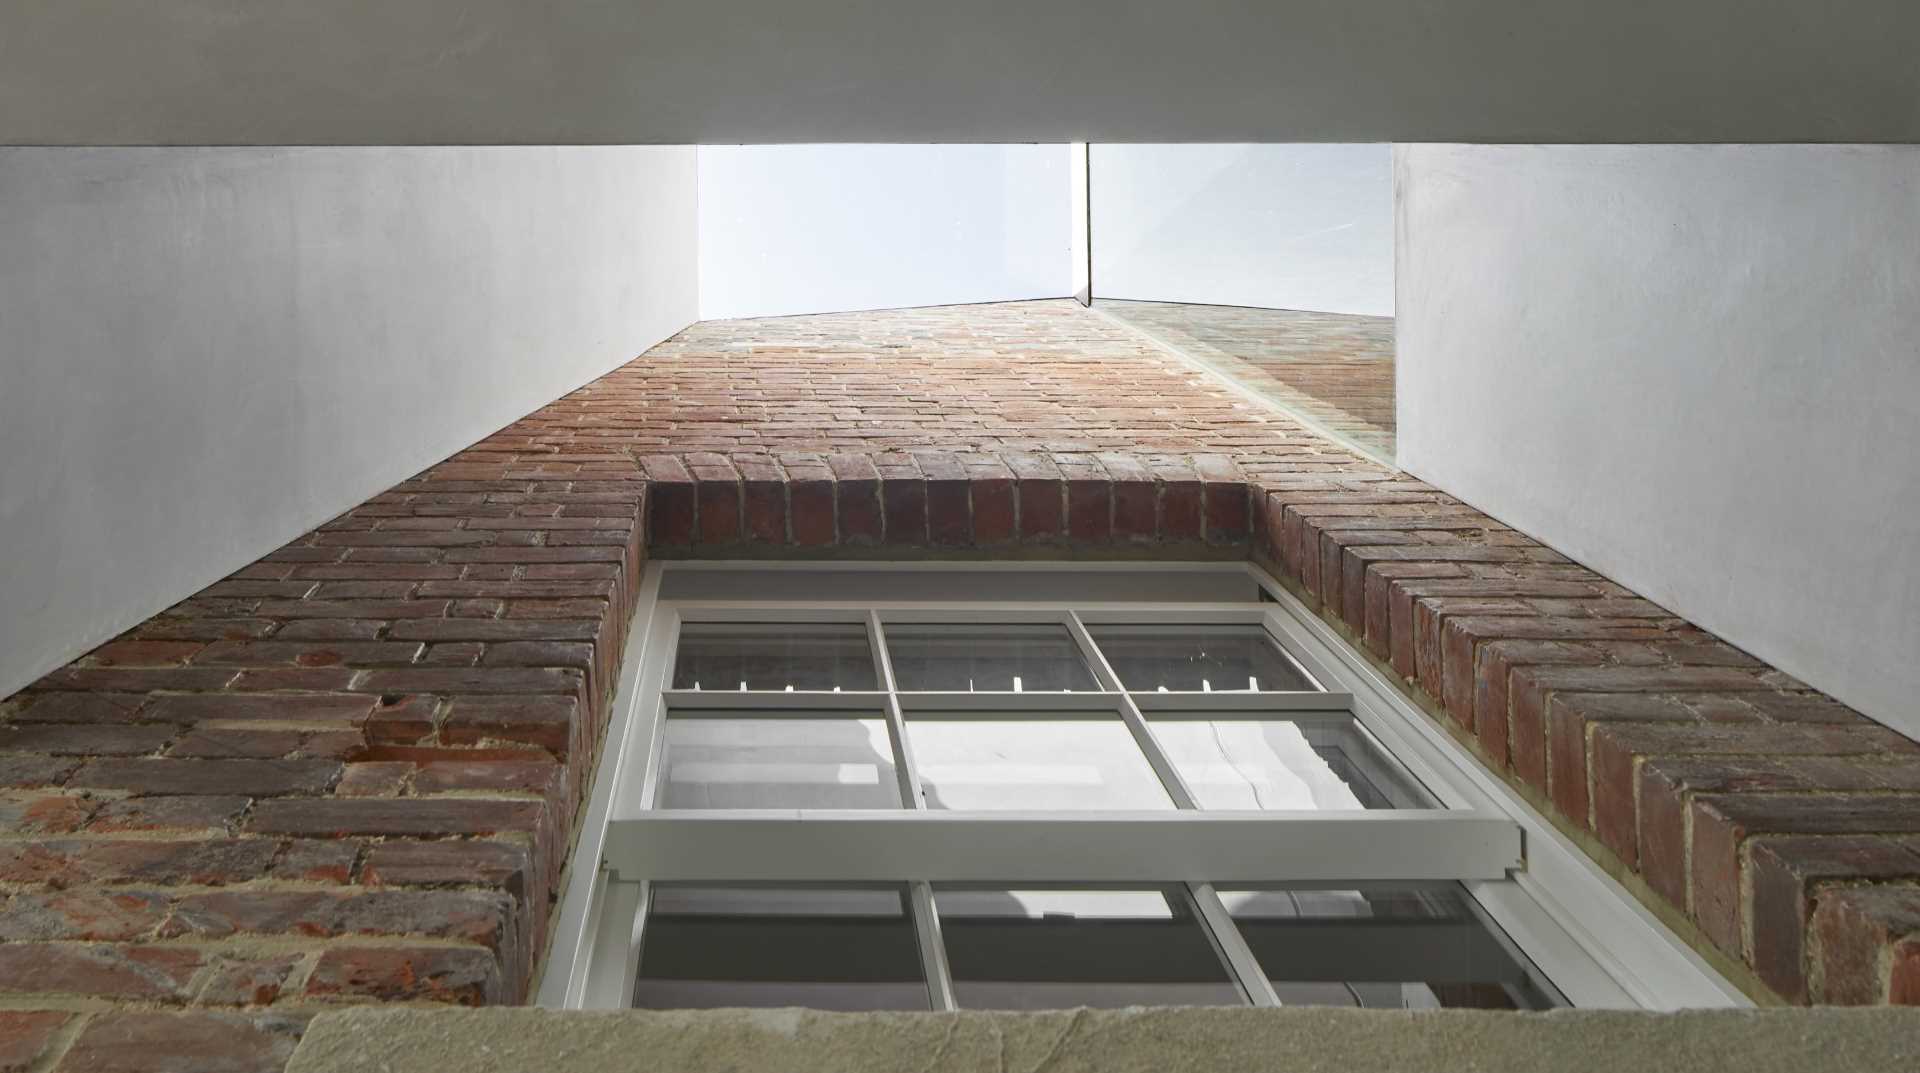 An old brick house with a new extension shows of the original brick walls and windows.